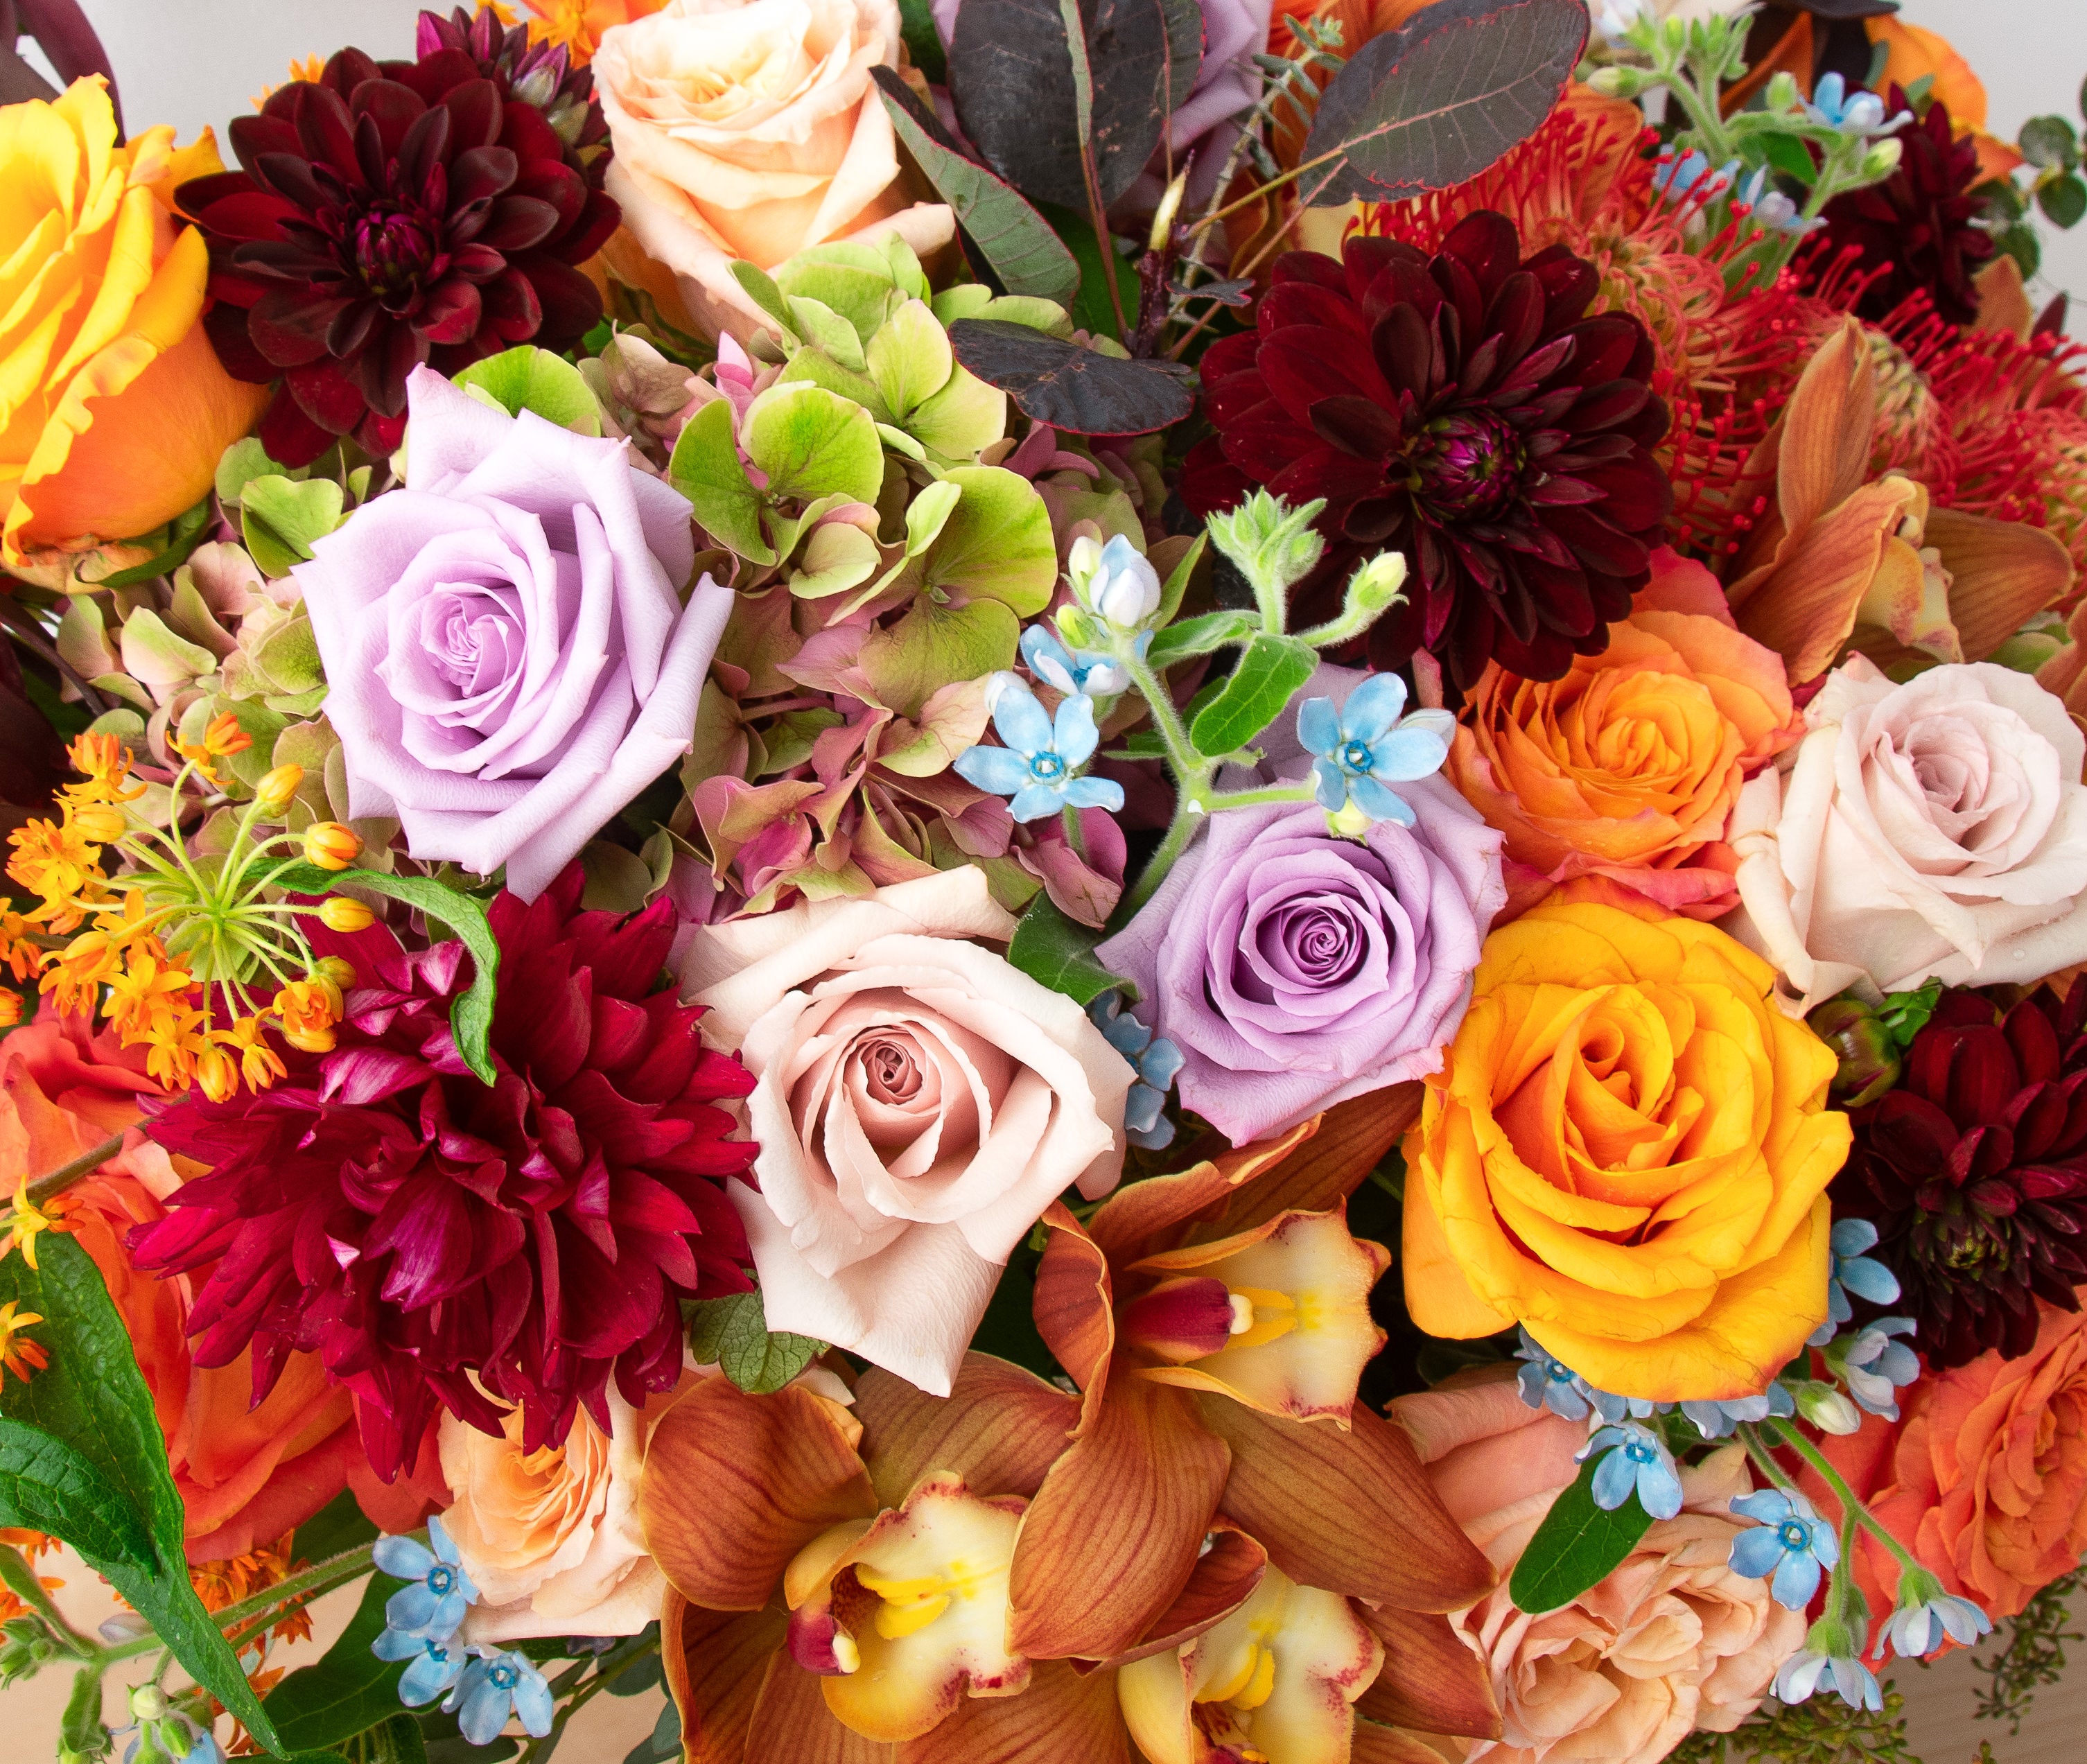 Luxury Florist & Flower Delivery | Scotts Flowers NYC